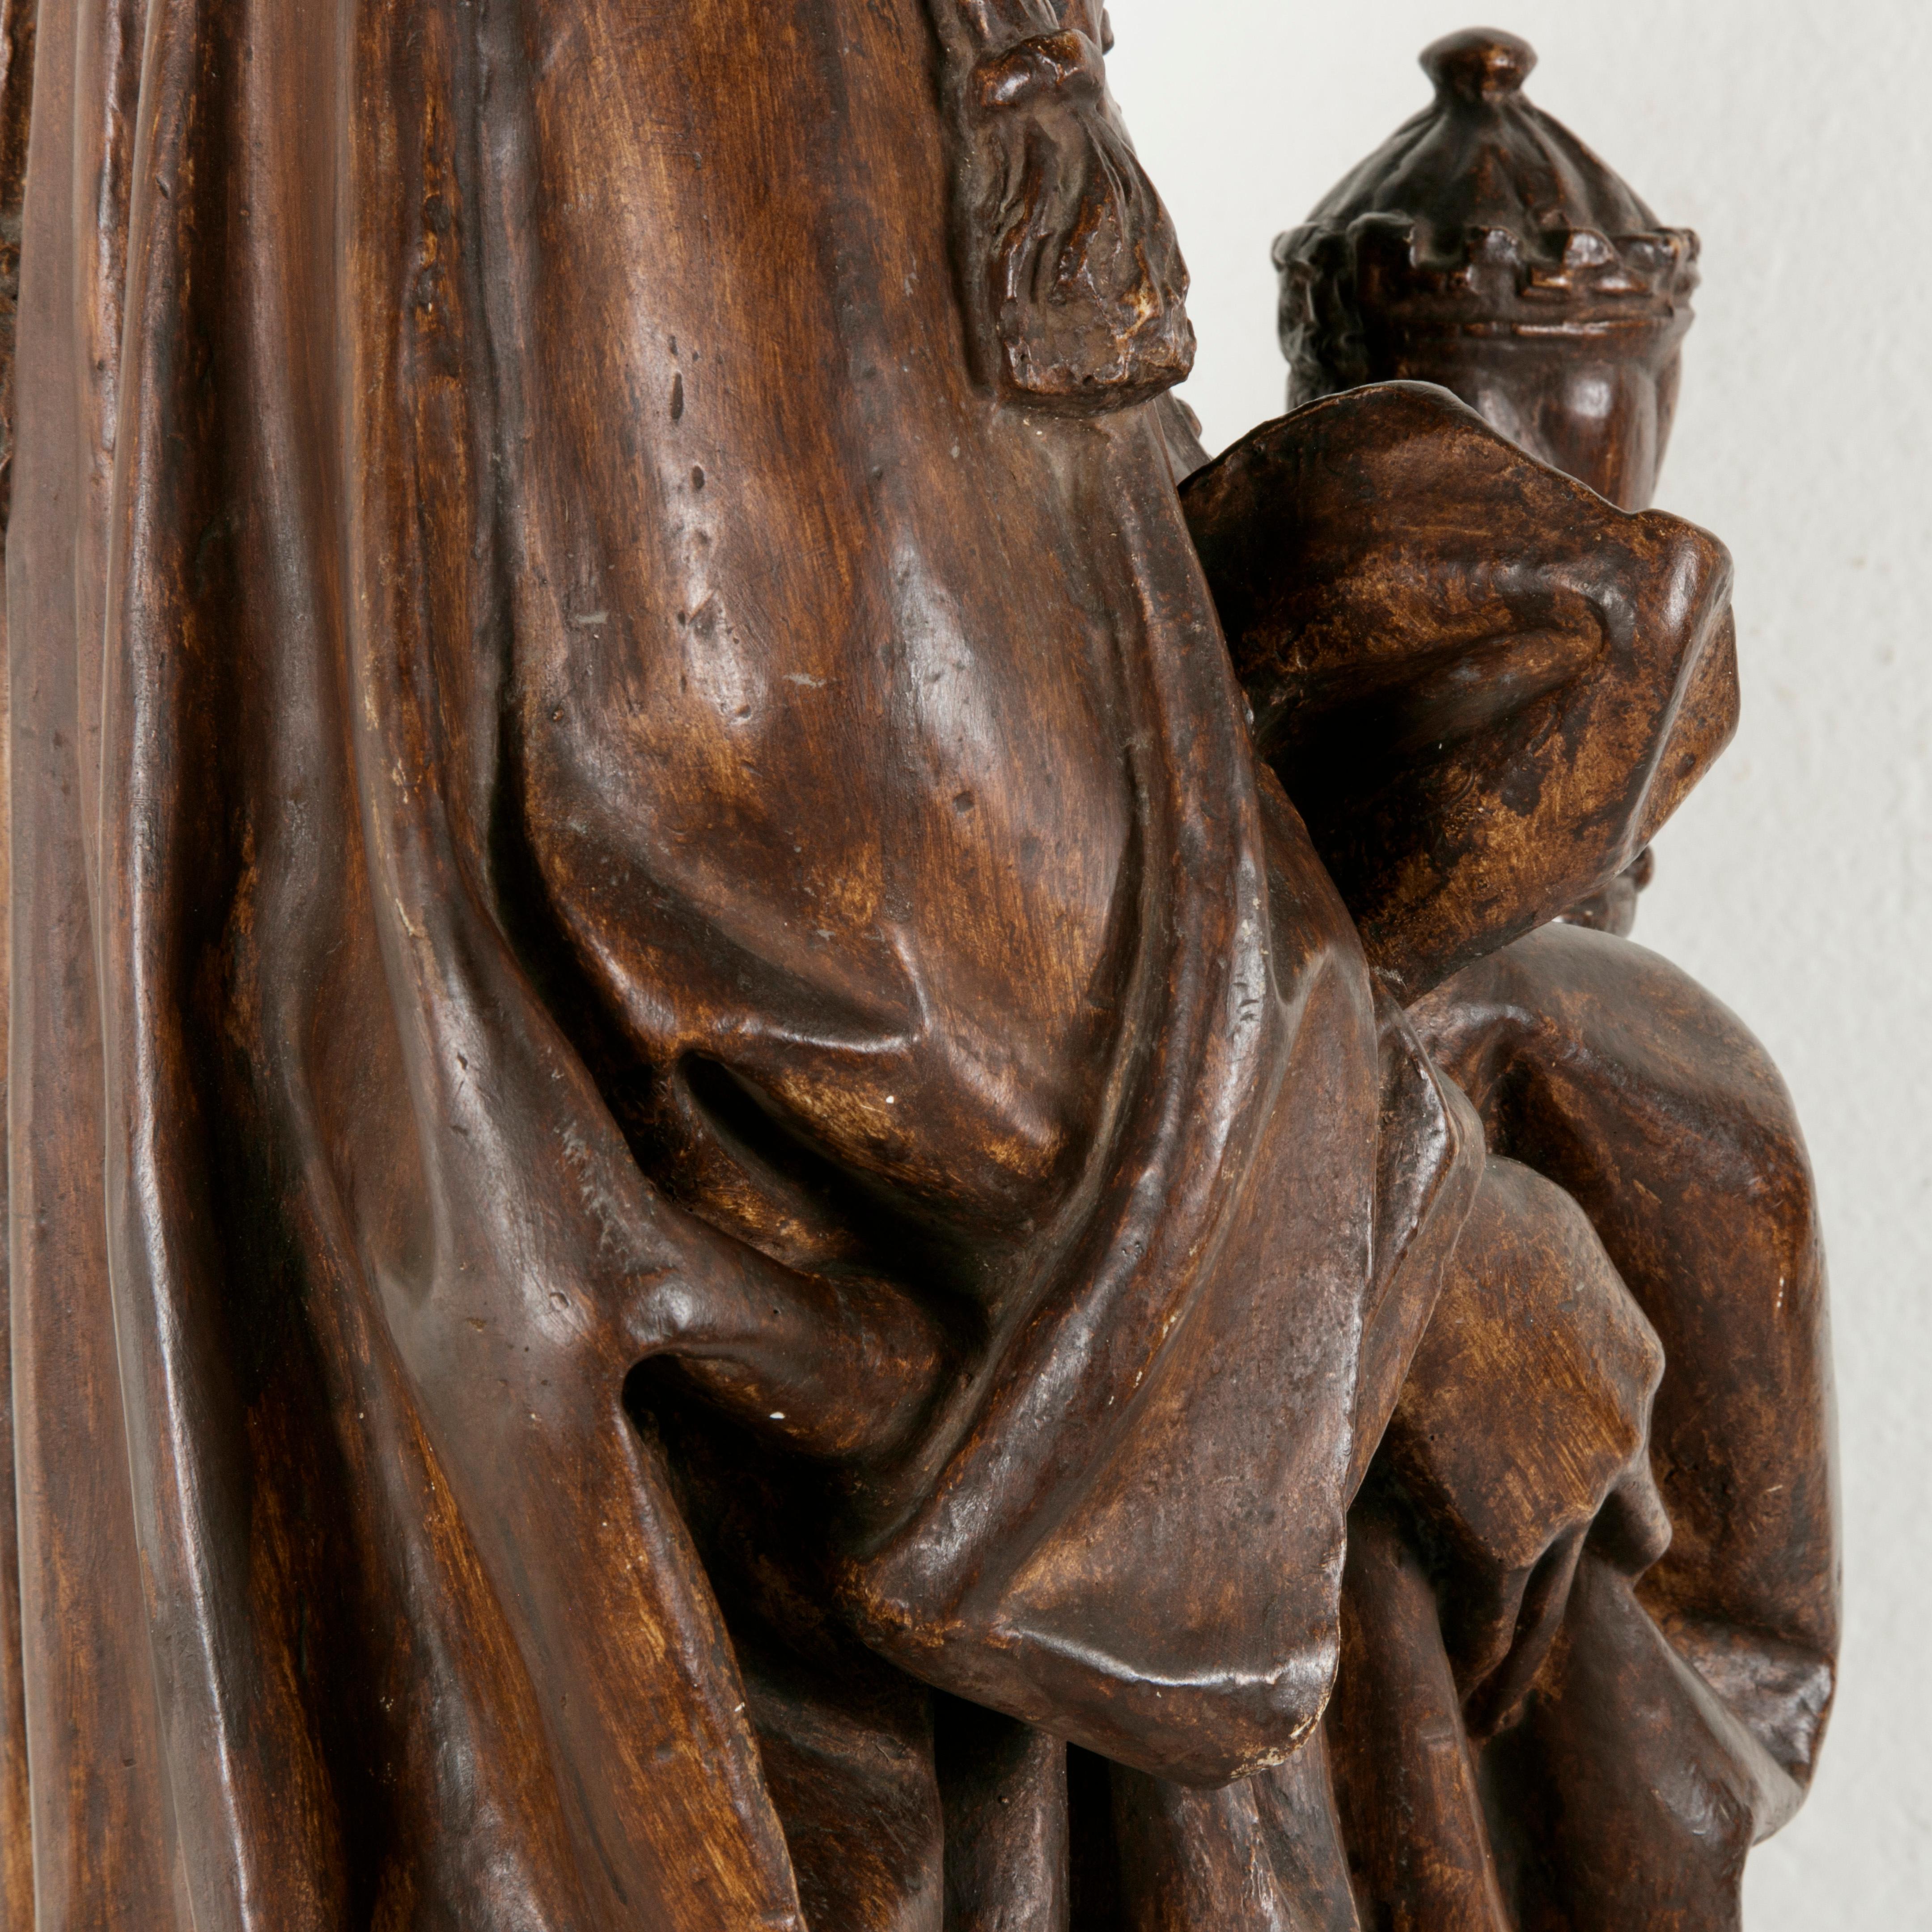 French Plaster on Wood Sculpture of Mary Magdalene in Renaissance Dress 4